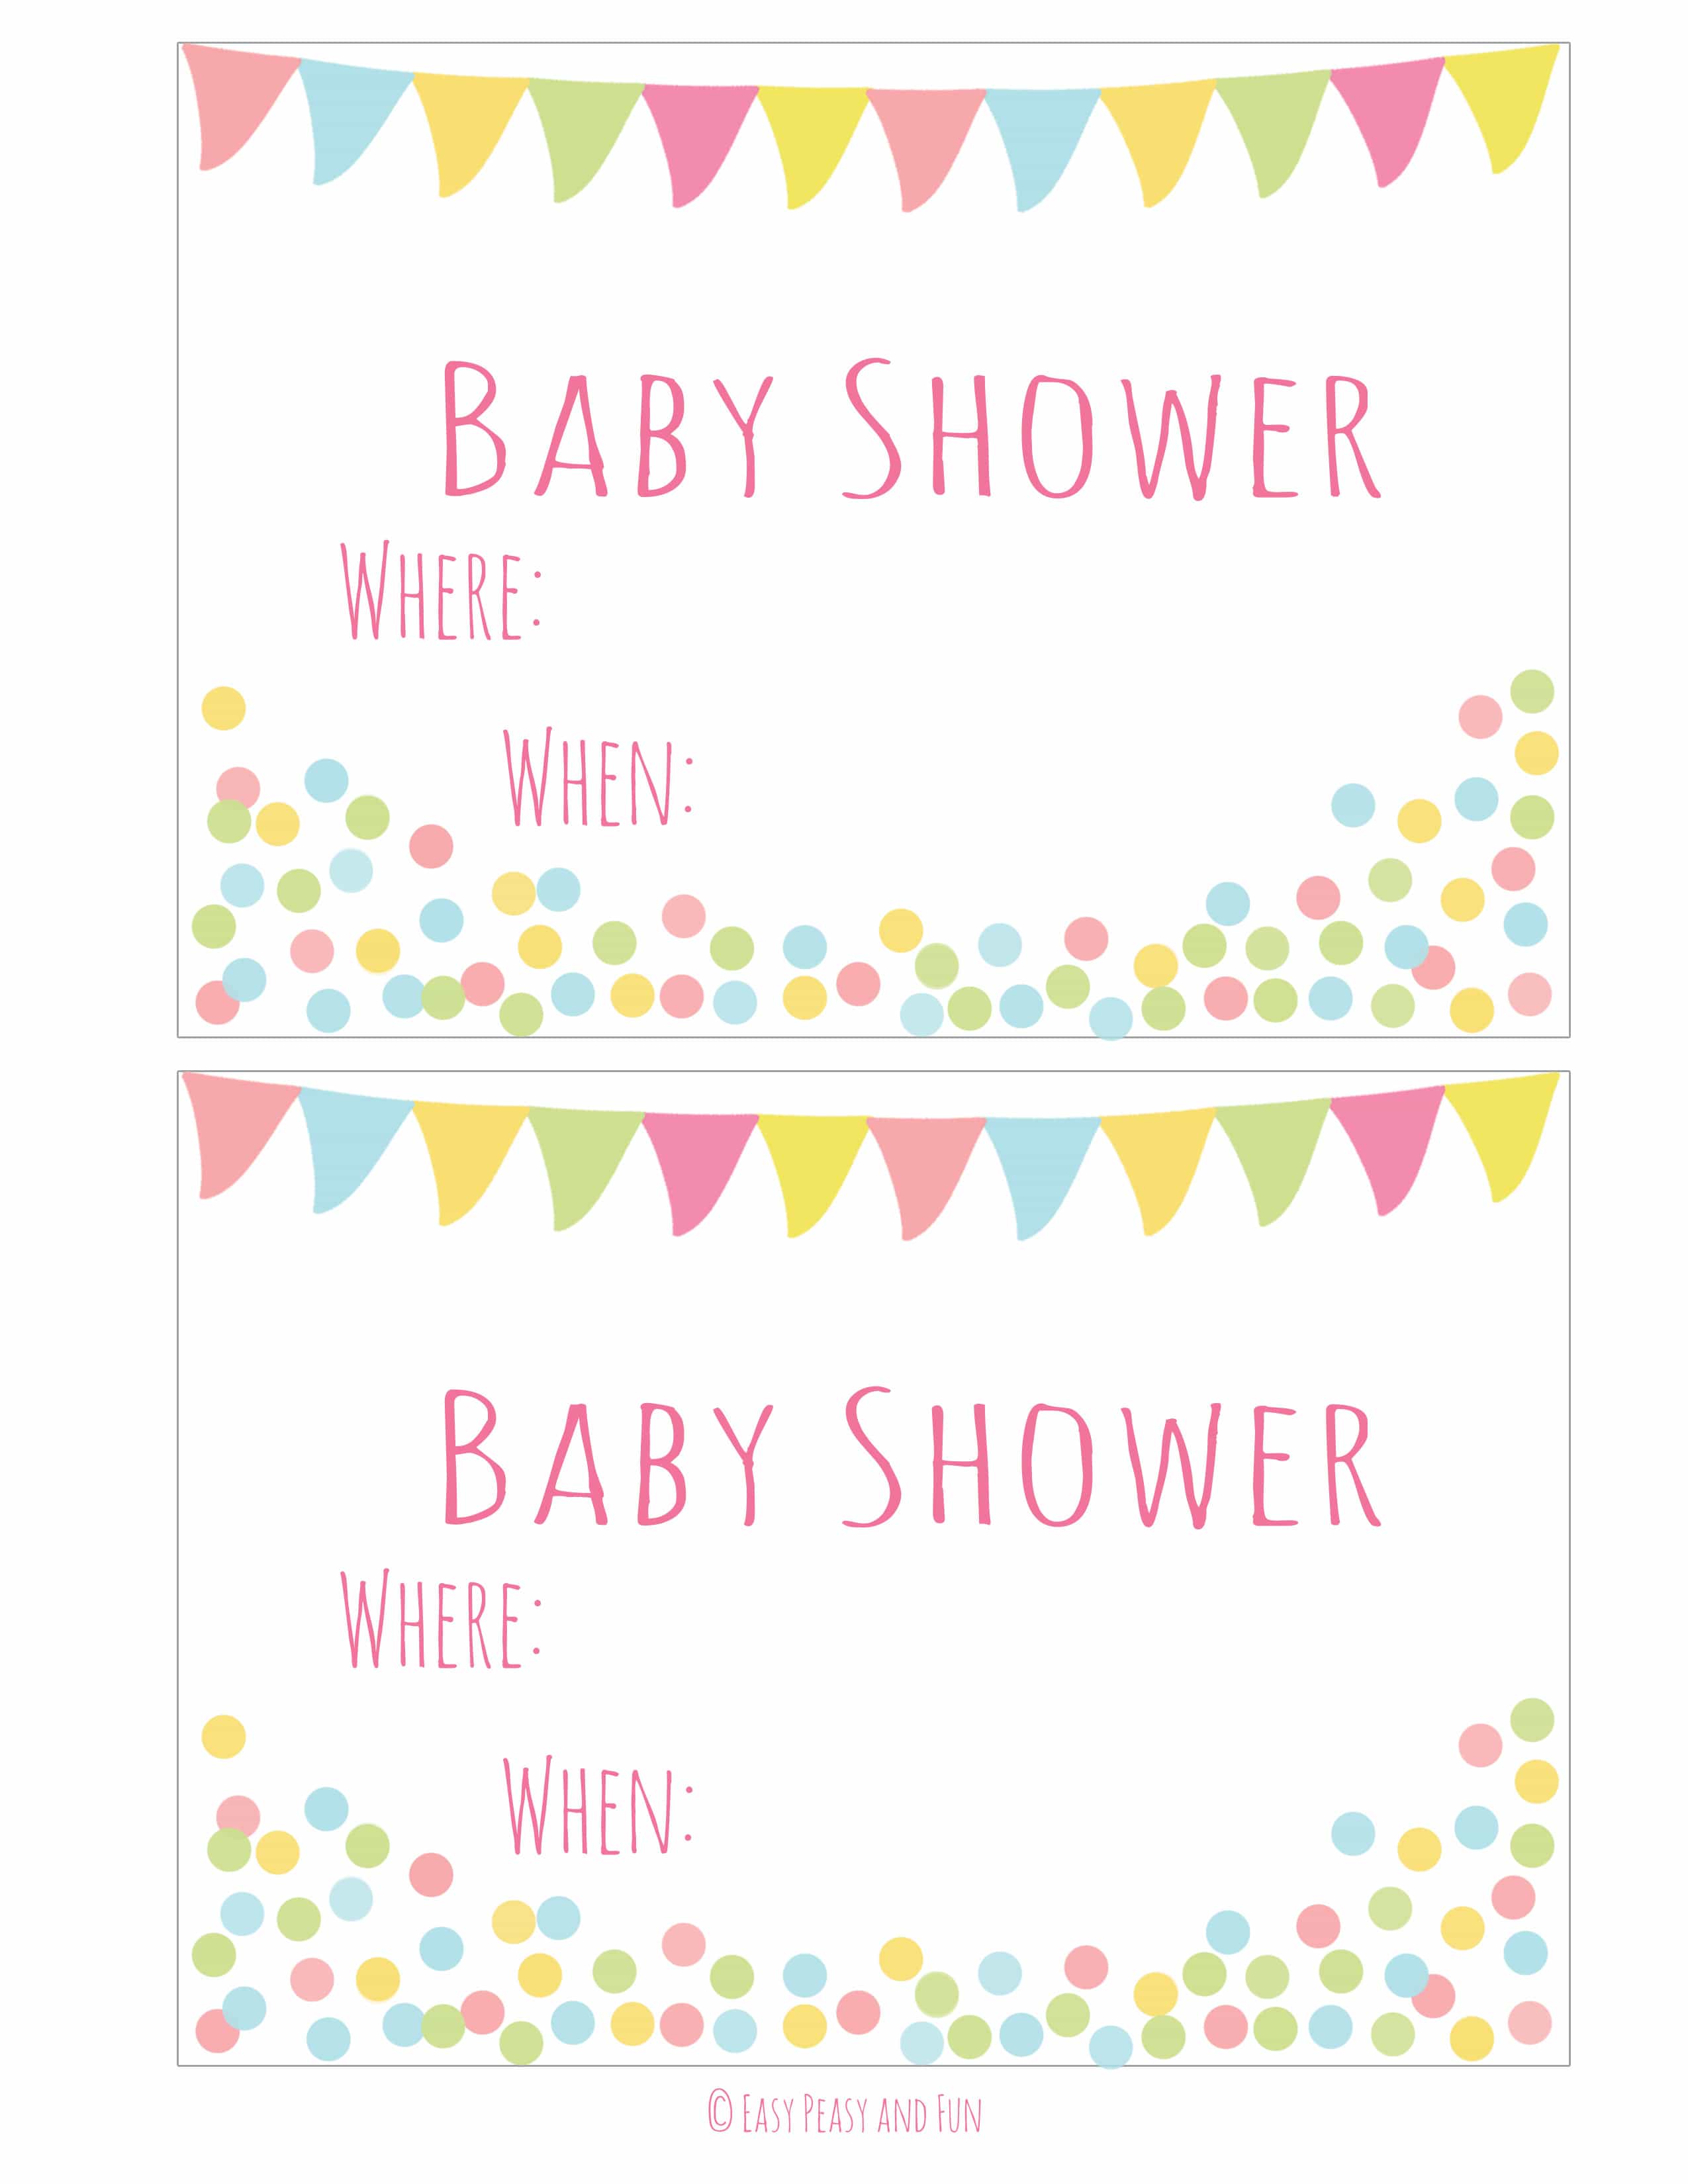 Baby Shower Invitations Free Downloadable Templates Musicgas